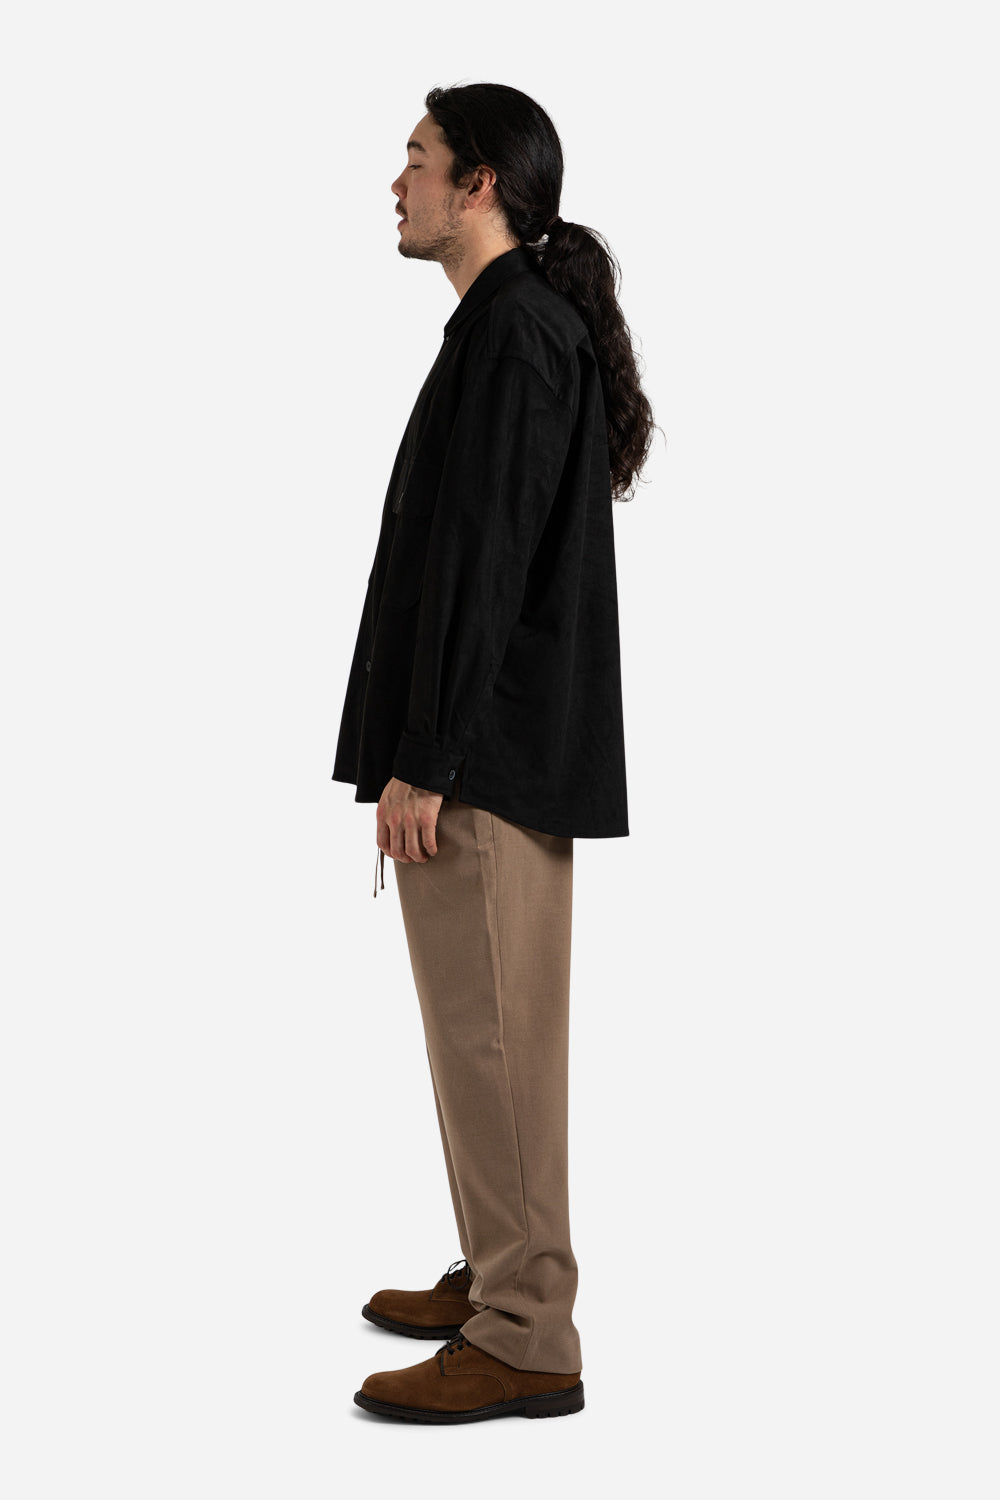 Frizmworks Suede Oversized CPO Shirt in Black - Wallace Mercantile Sho